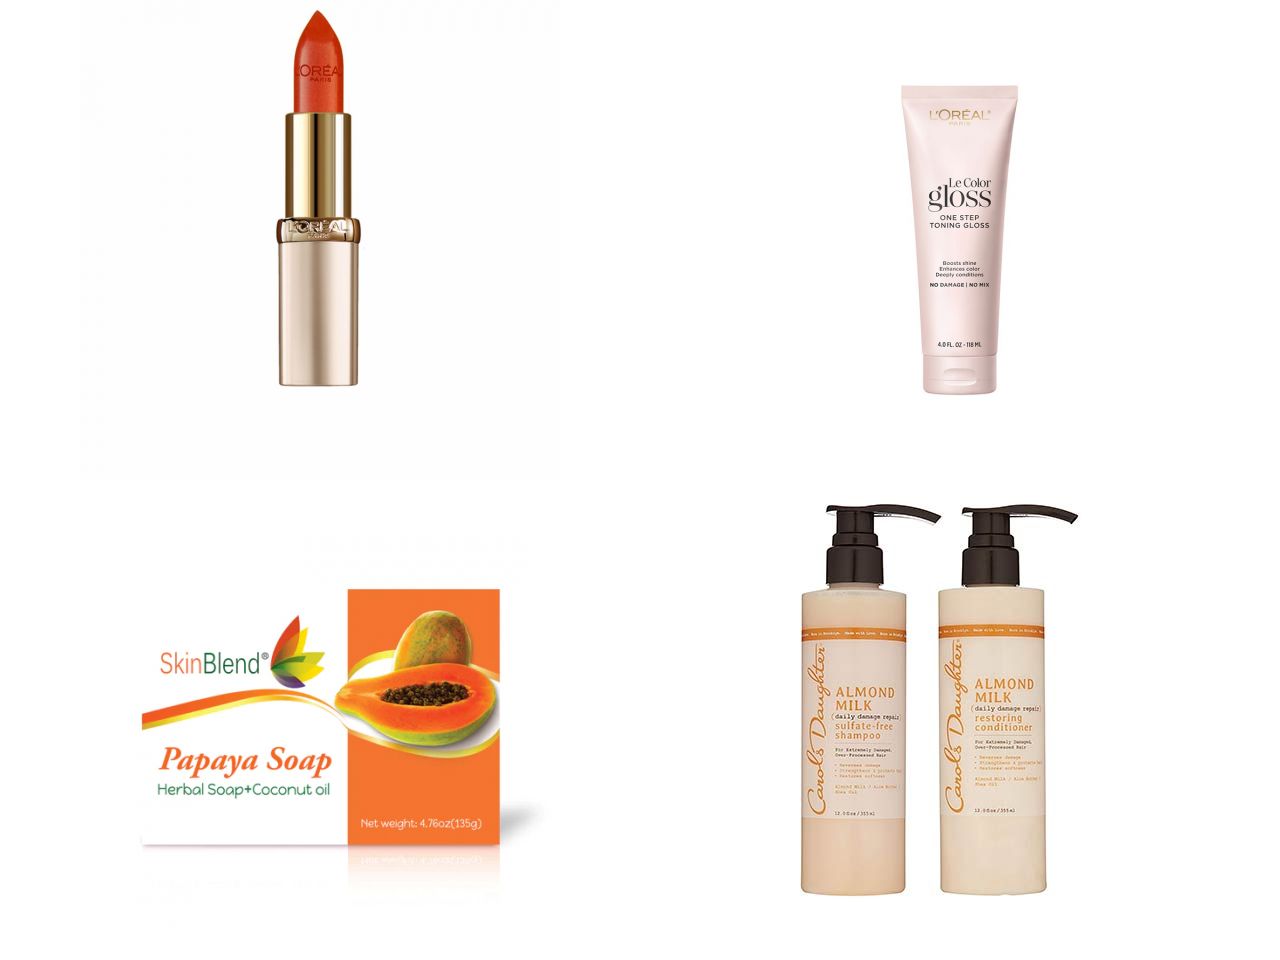 12 Freebies For Women (L’Oreal, Garnier And More!)